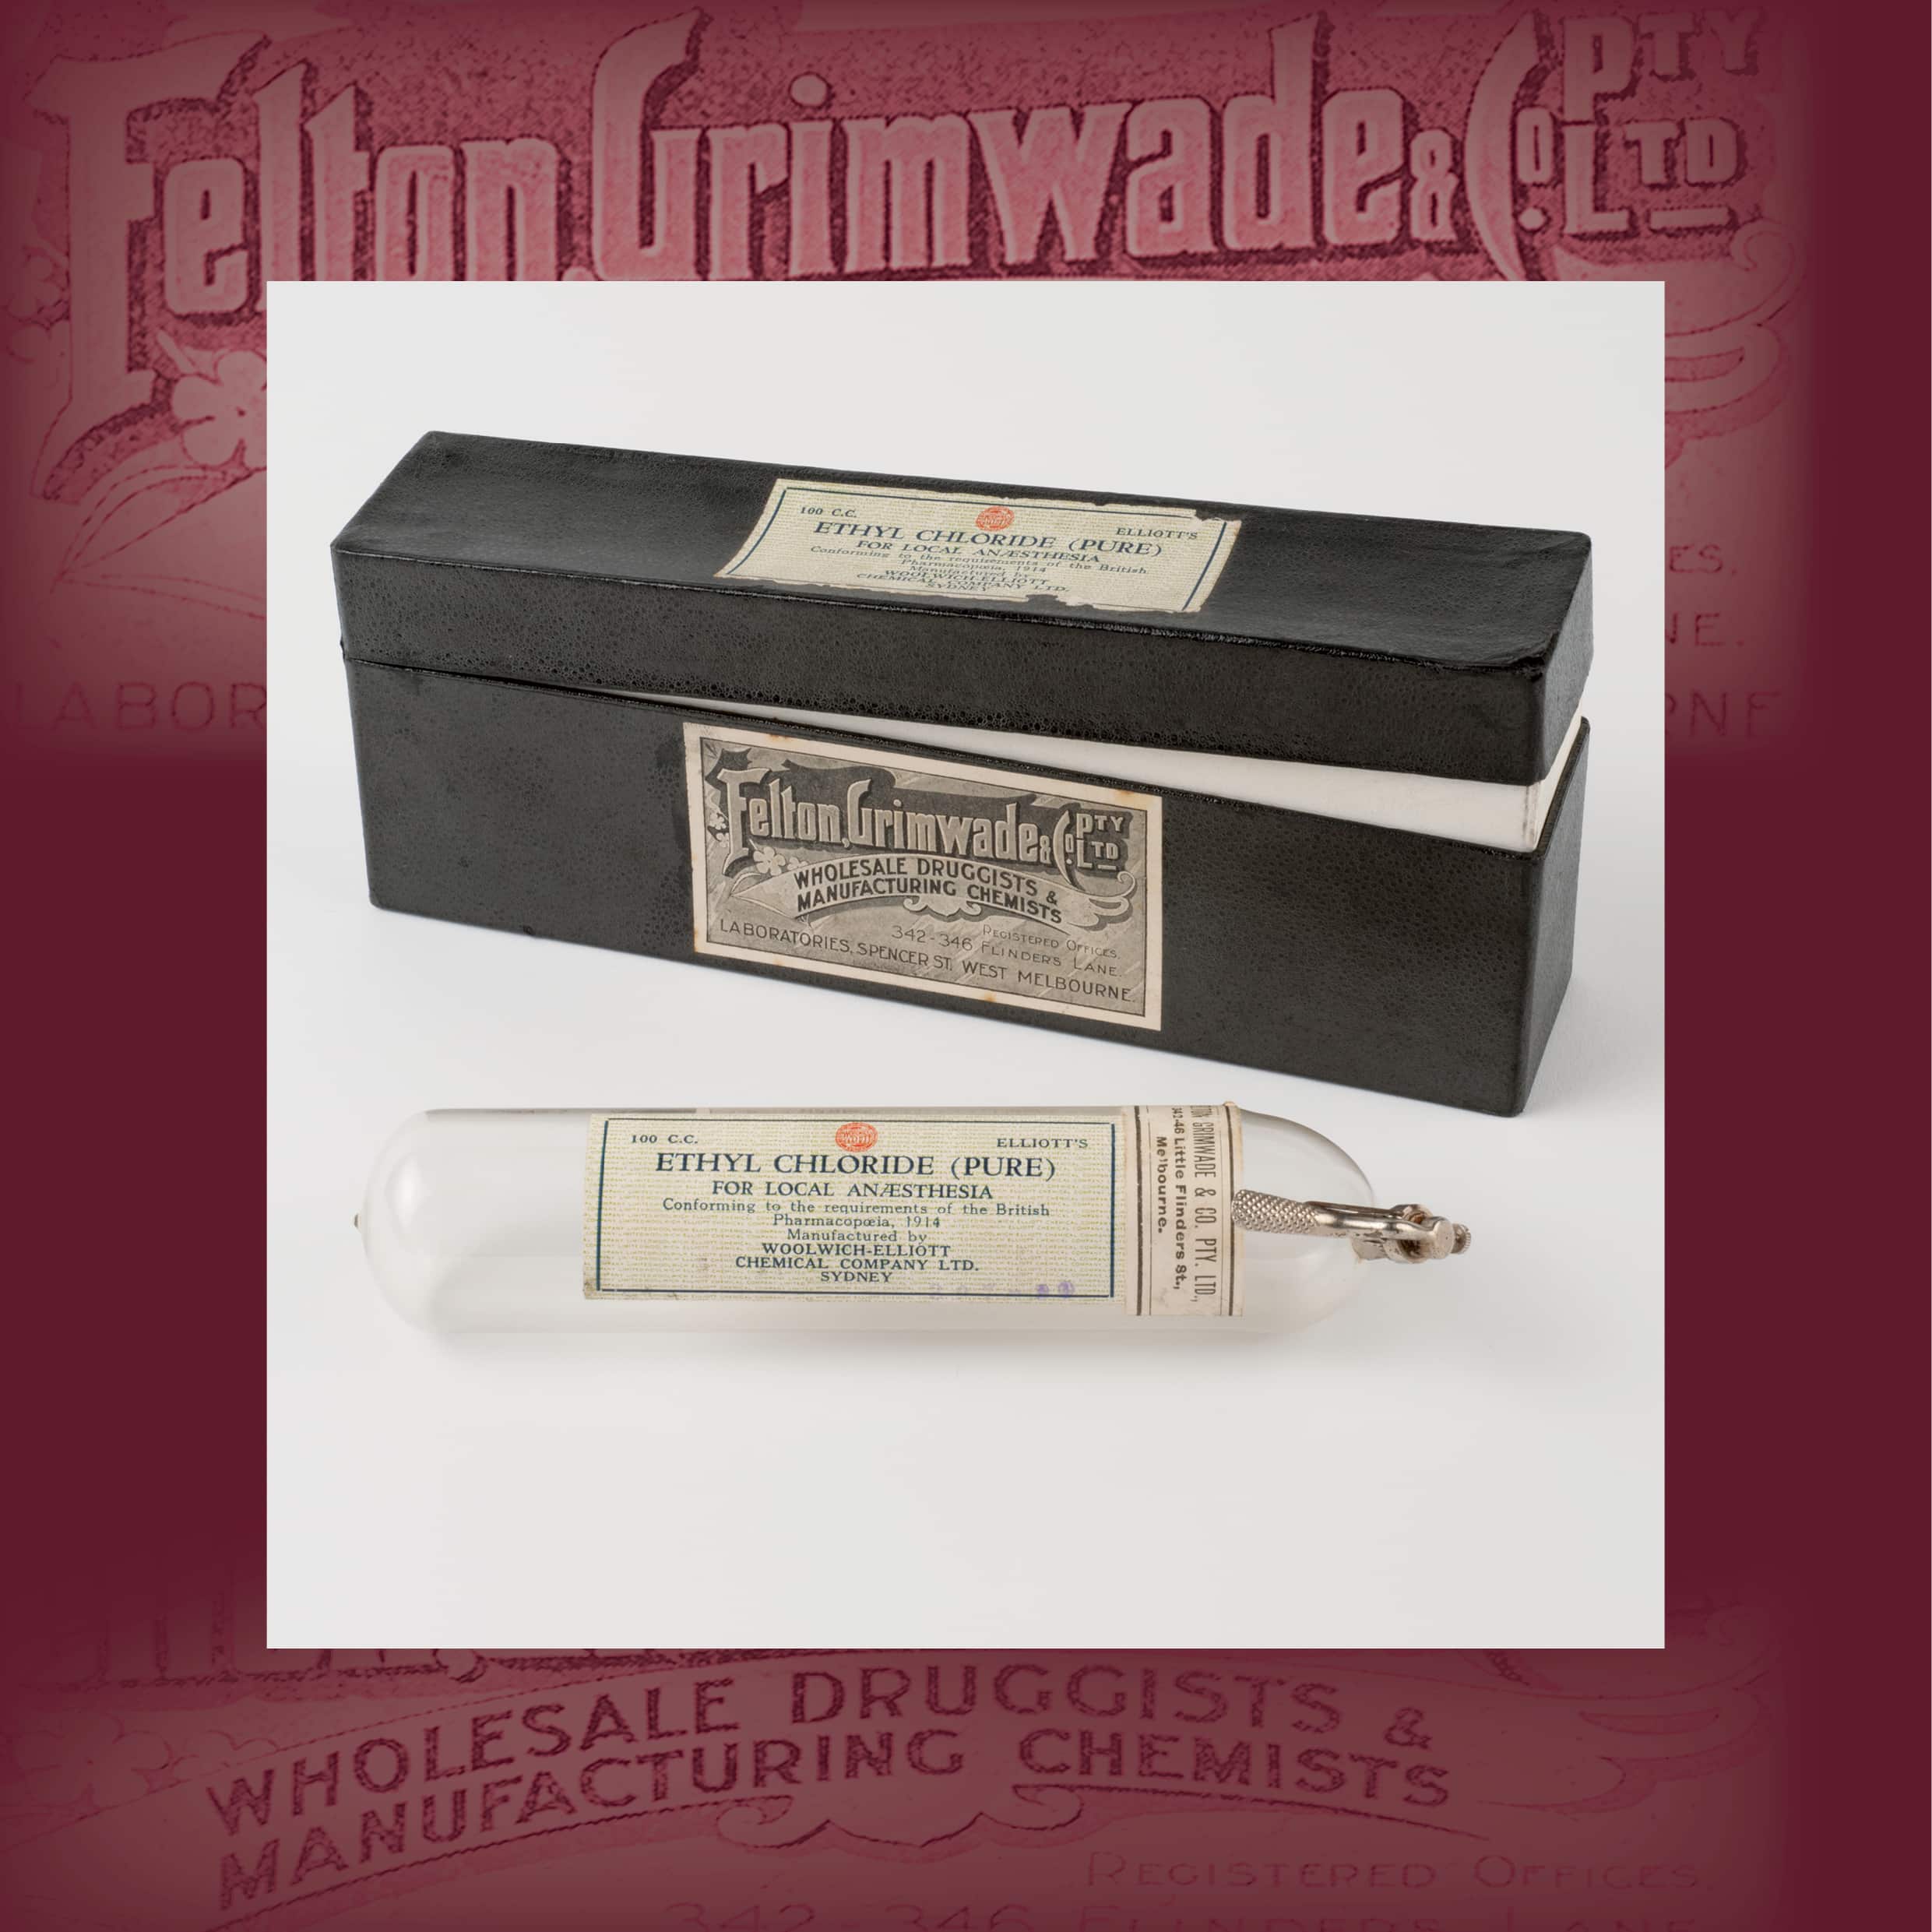 Woolwich-Elliott Chemical Company Ltd (Sydney, active 1929–65), distributed by Felton, Grimwade & Co. Pty Ltd (Melbourne, active 1867–1930), Ethyl chloride (pure) for local anaesthesia, c. 1929, paper, glass, cardboard, metal; box 7.0 × 20.5 × 4.3 cm; bottle 17.0 × 4.3 cm (diam.). MHM03722, Medical History Museum, University of Melbourne. 